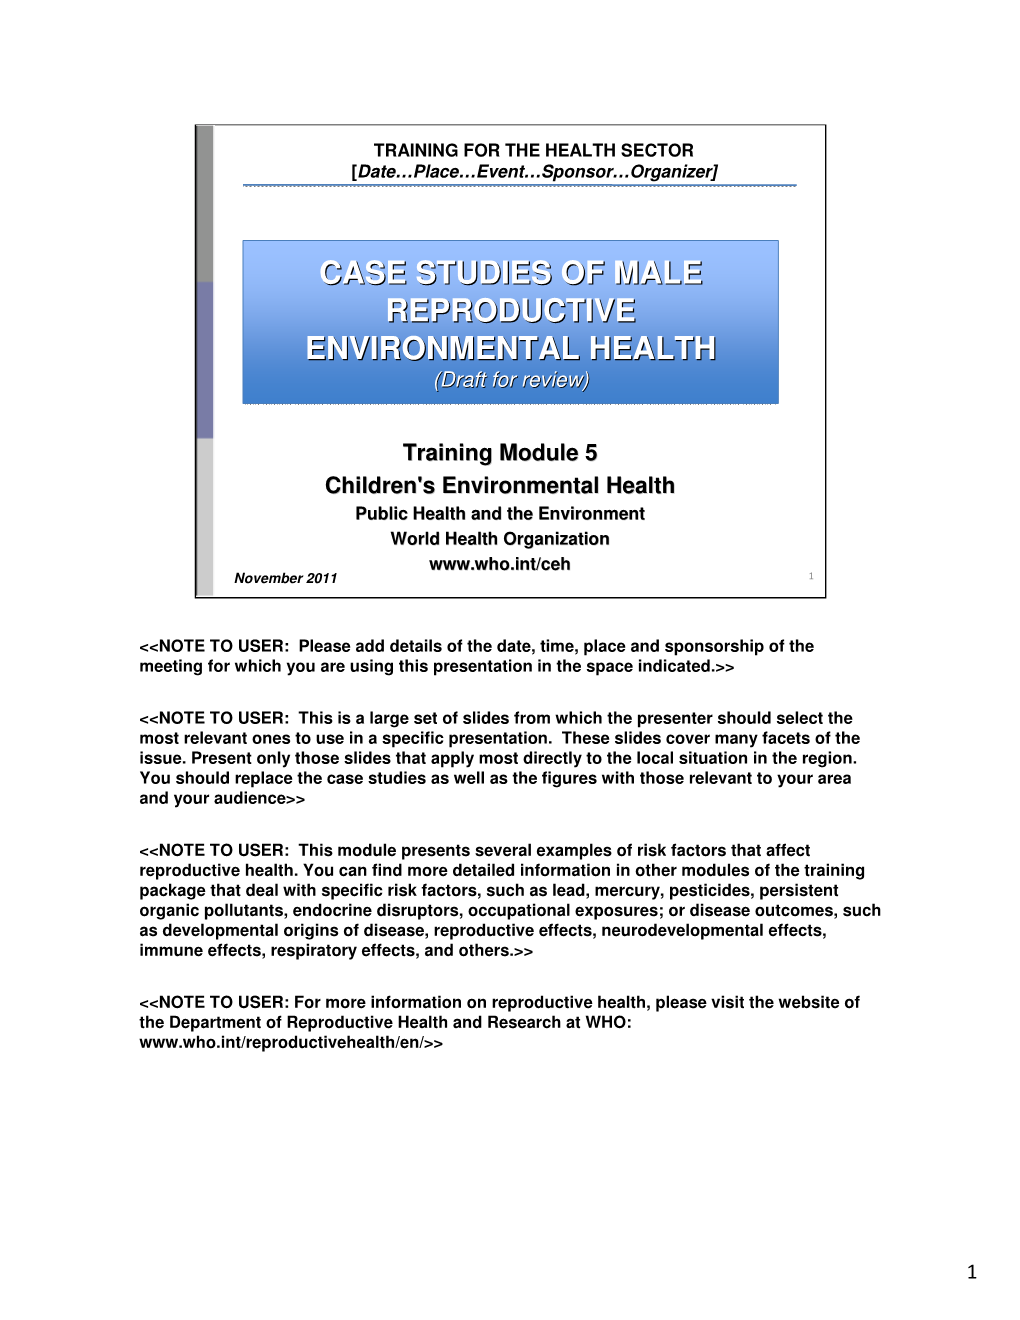 CASE STUDIES of MALE REPRODUCTIVE ENVIRONMENTAL HEALTH (Draft for Review)